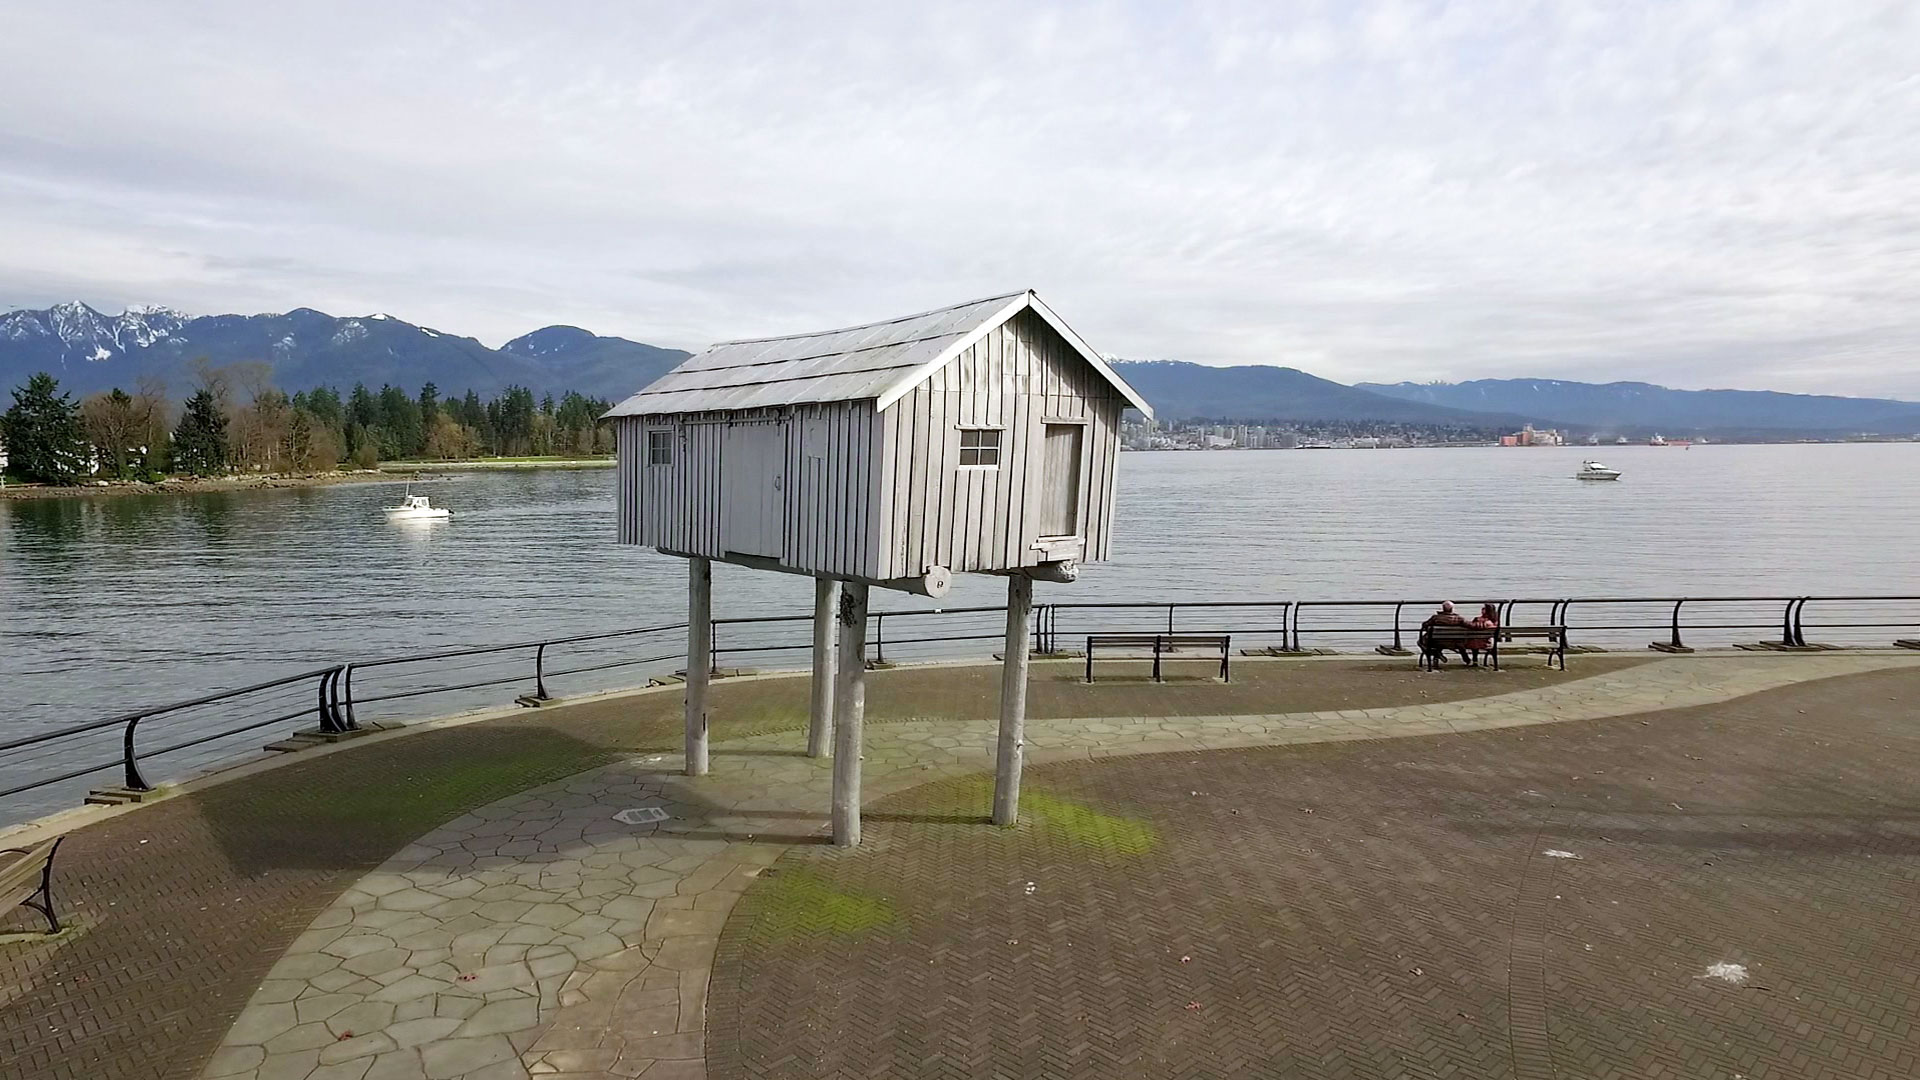 Liz Magor. LightShed, 2005. Installation view at Coal Harbour, Vancouver. Production still from the ART21 Art in the Twenty-First Century Season 8 episode, Vancouver. © ART21, Inc. 2014